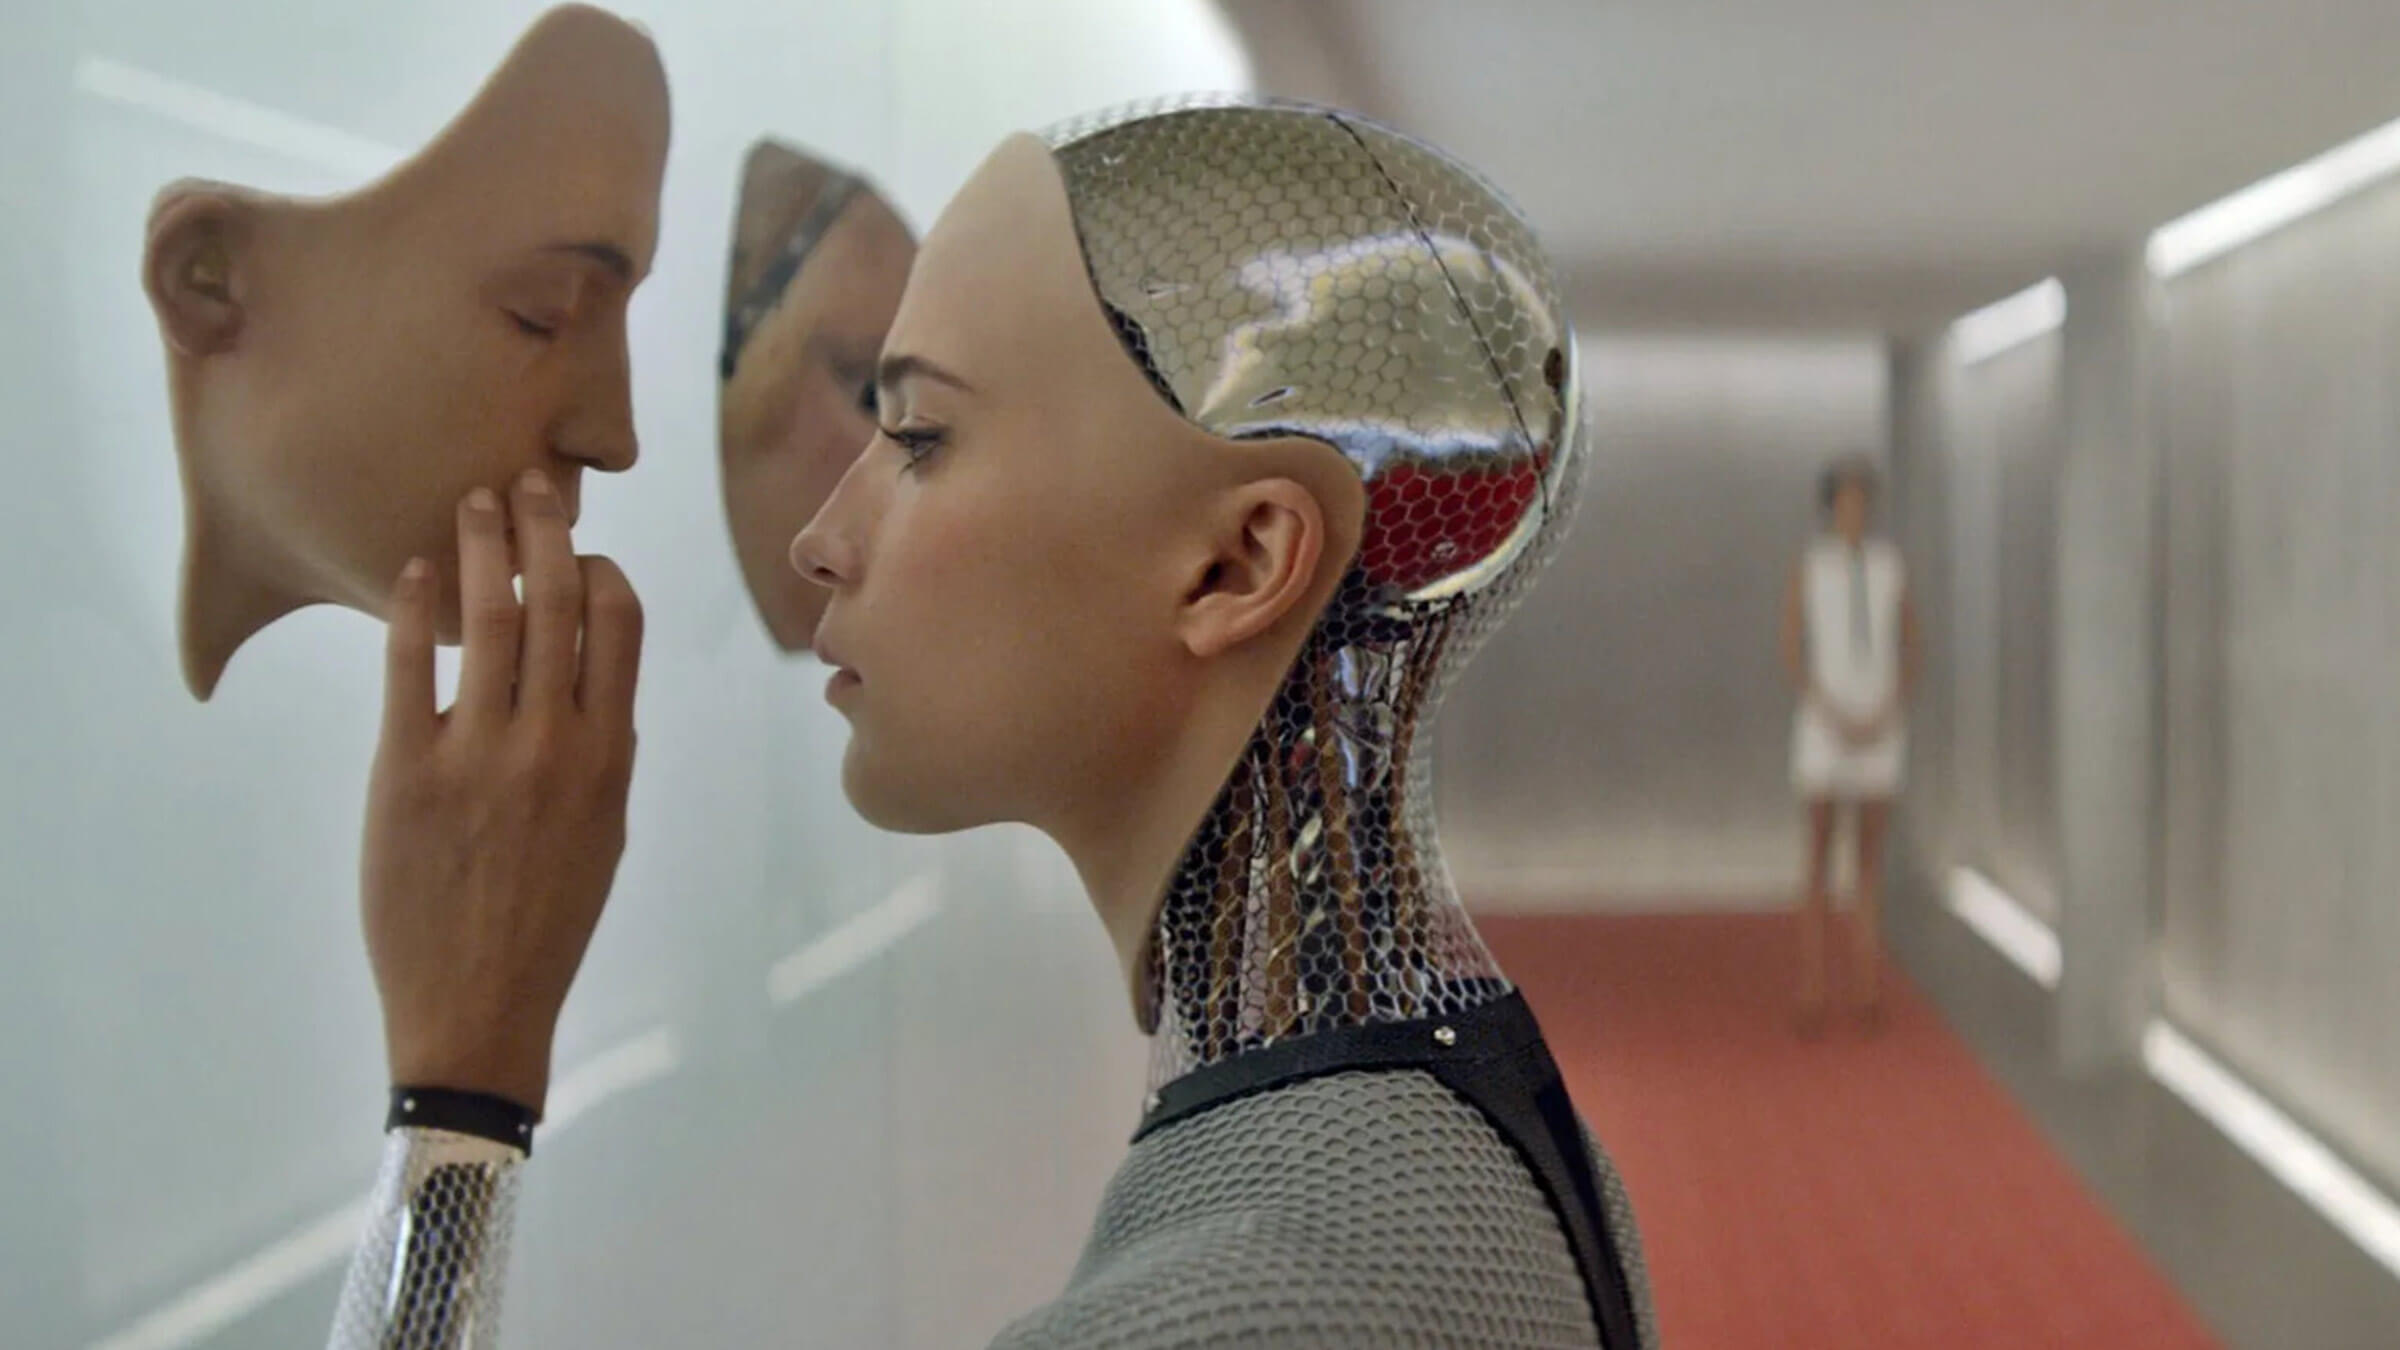 Robot Movies A Mechanism for Discussing Humanity